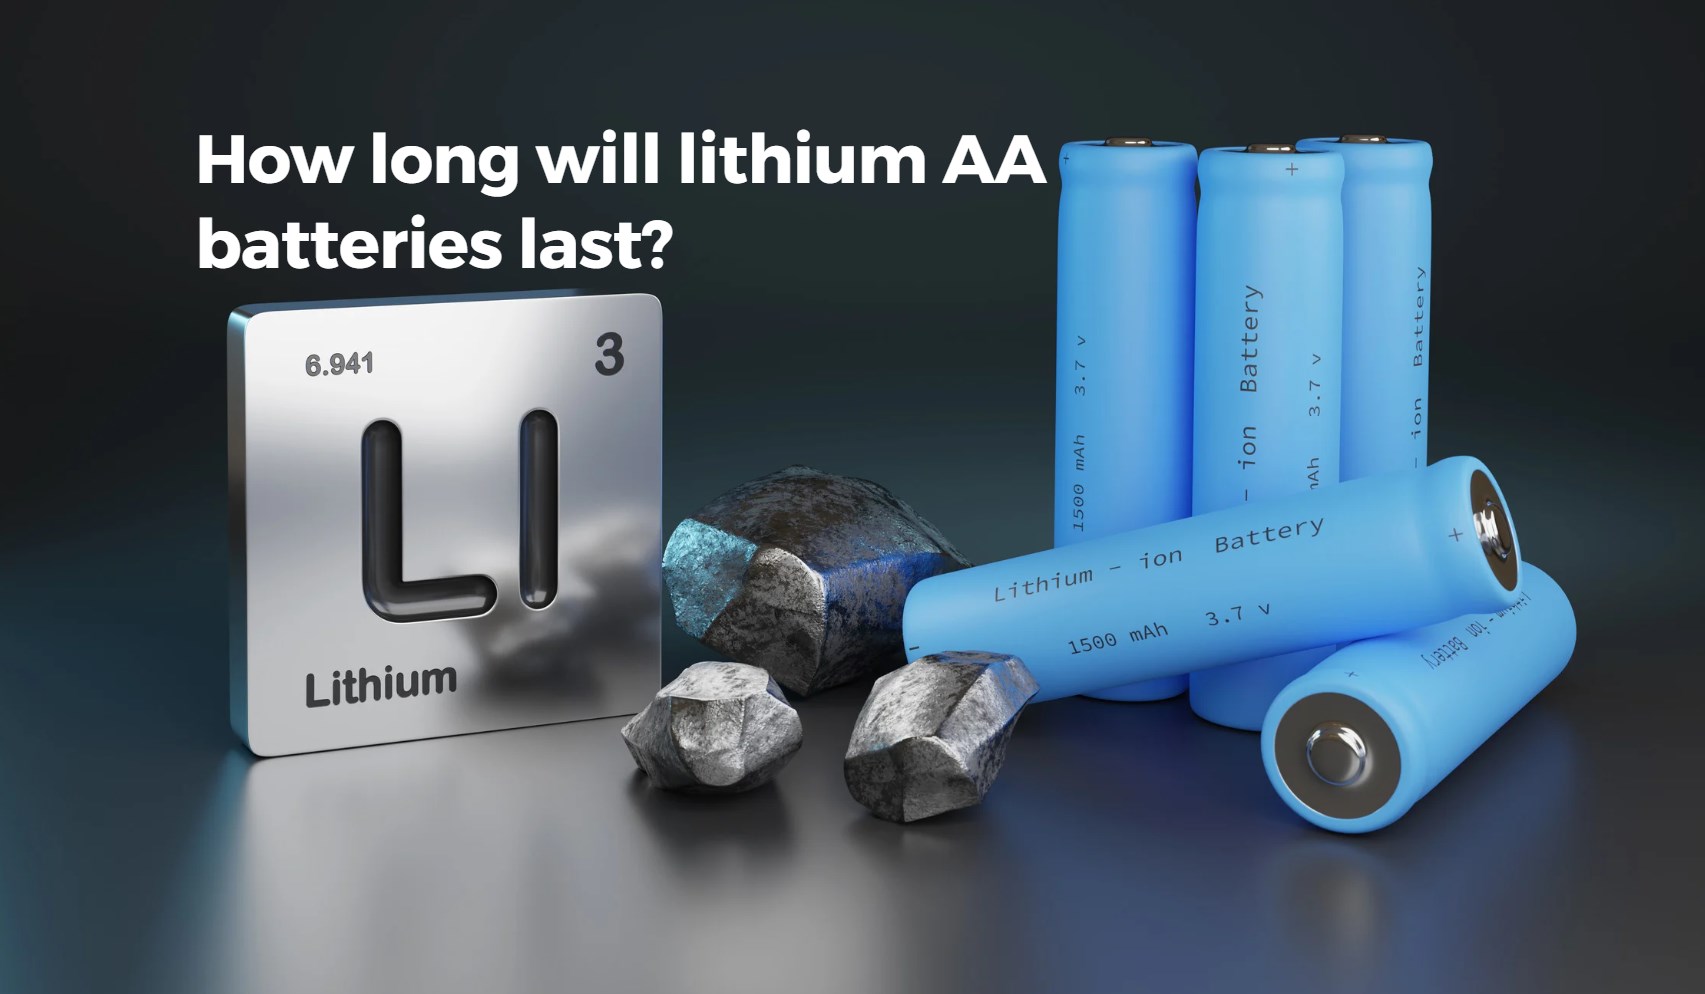 How long will lithium AA batteries last?